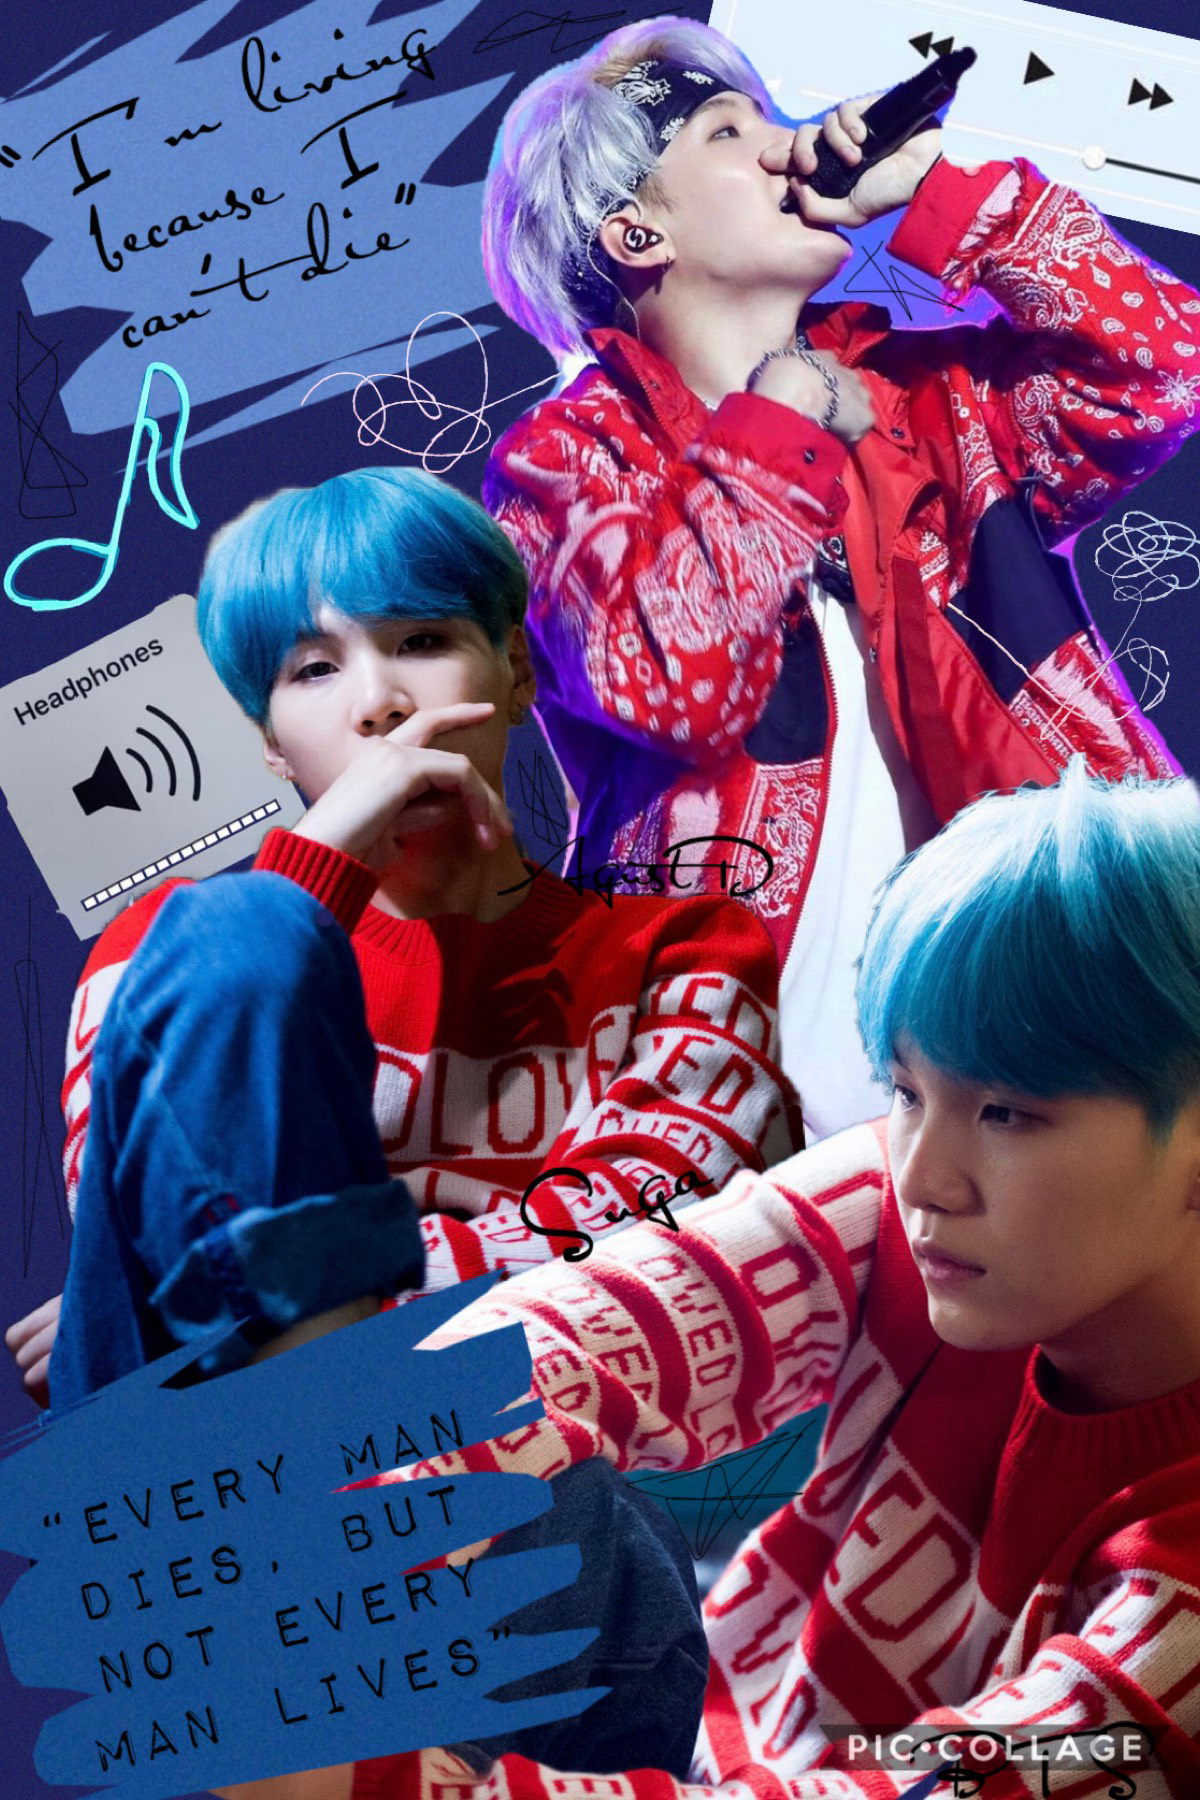 This was just meant to be for a contest, but I actually really like it. 

BTS Suga edit

***DONT FORGET ABOUT THE ICON CONTEST***